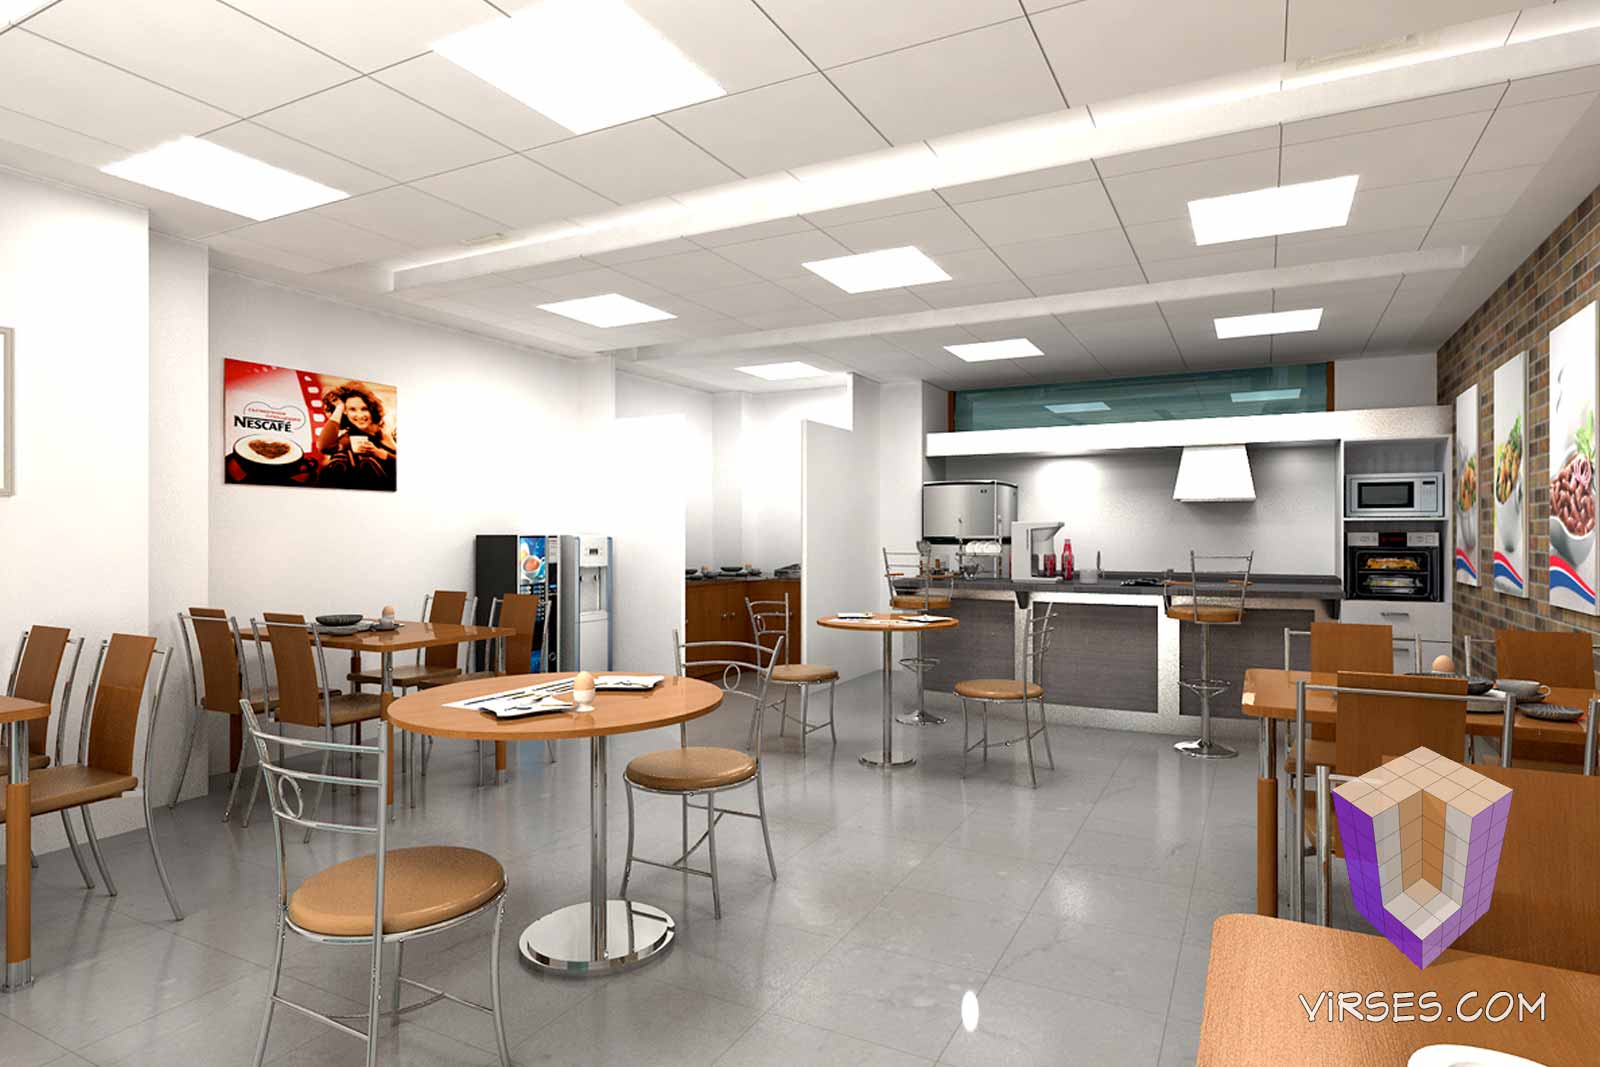 Cafe interiors Architectural Rendering